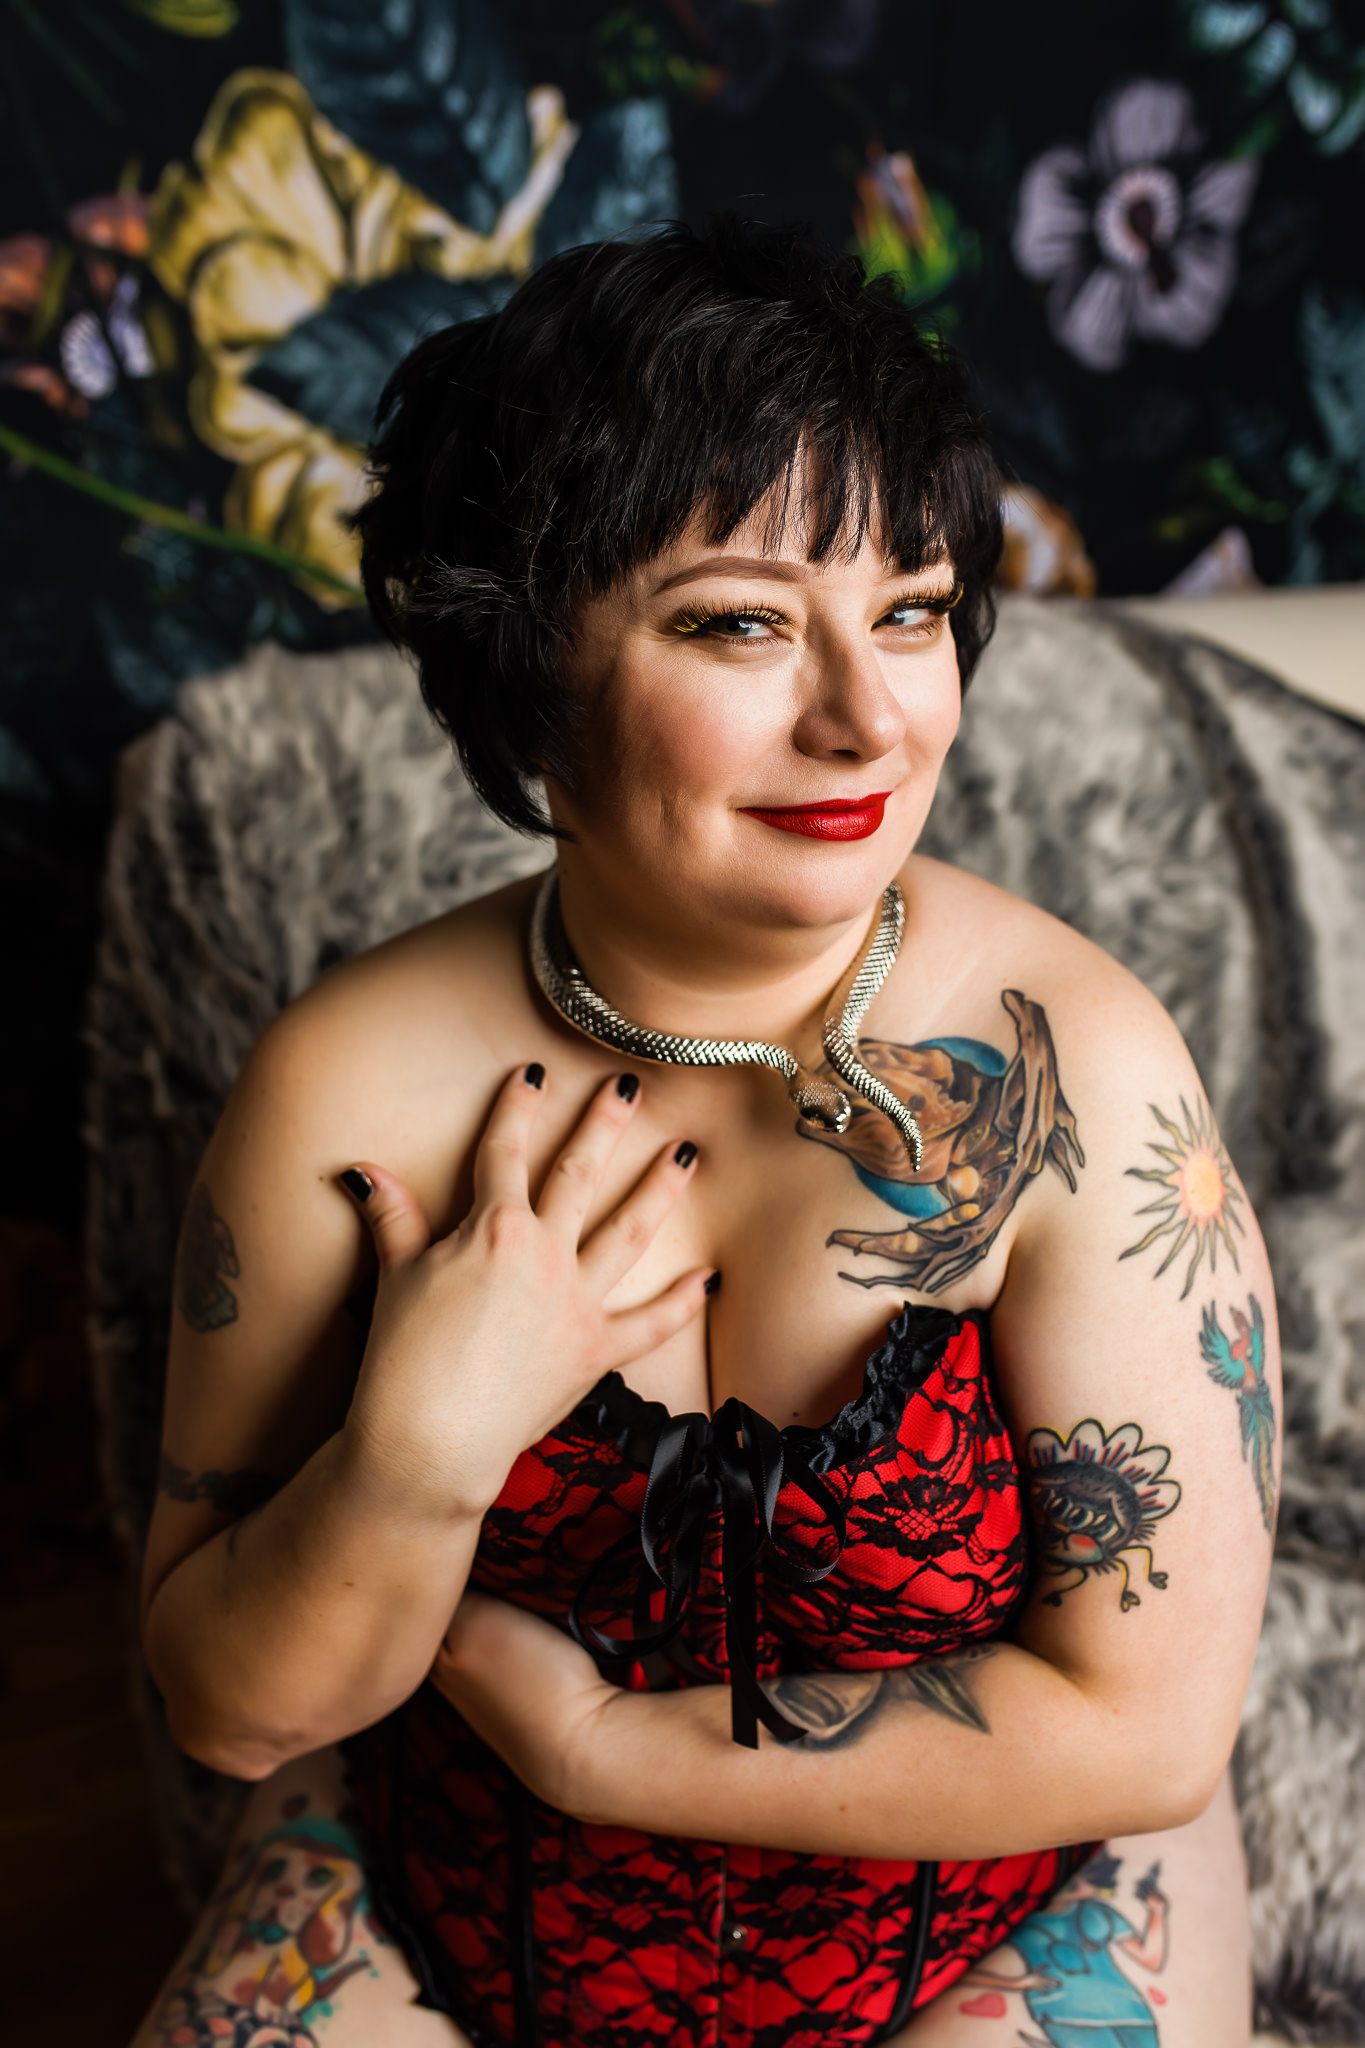 Sassy boudoir photo of a tattooed woman in a red corset